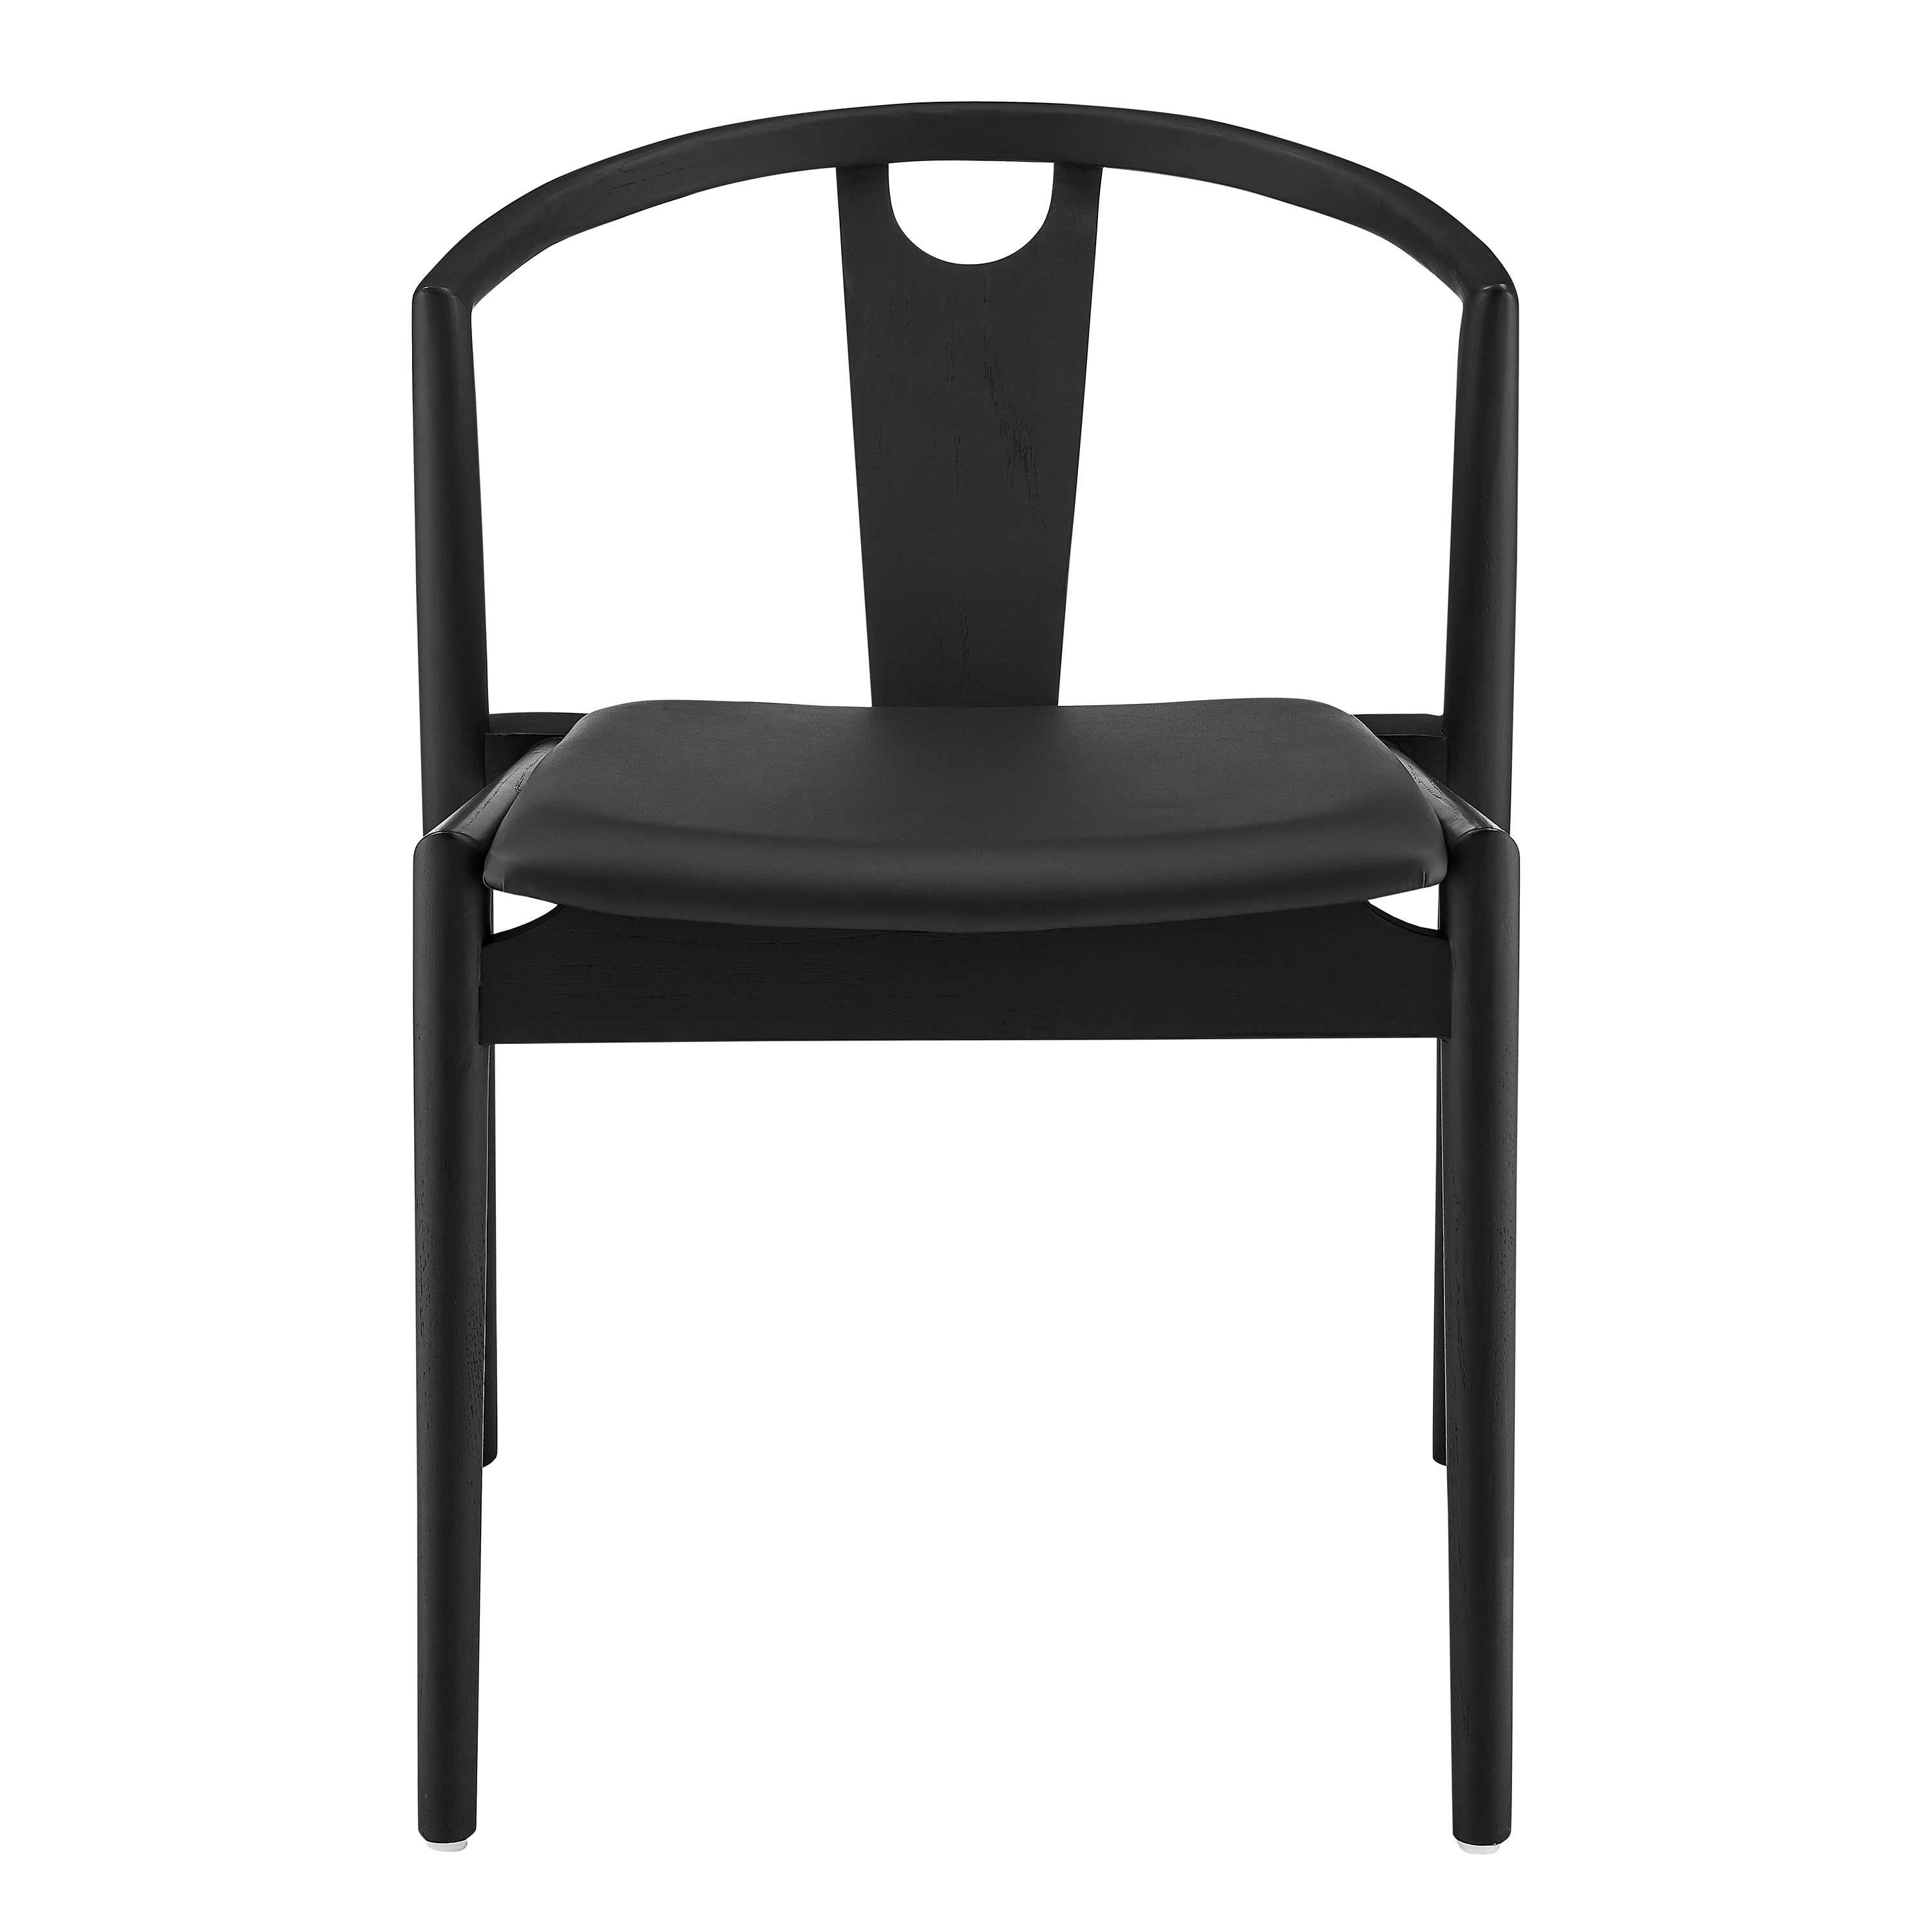 Euro Style Dining Chairs - Blanche Side Chair with Black Leatherette Seat and Black Frame - Set of 1